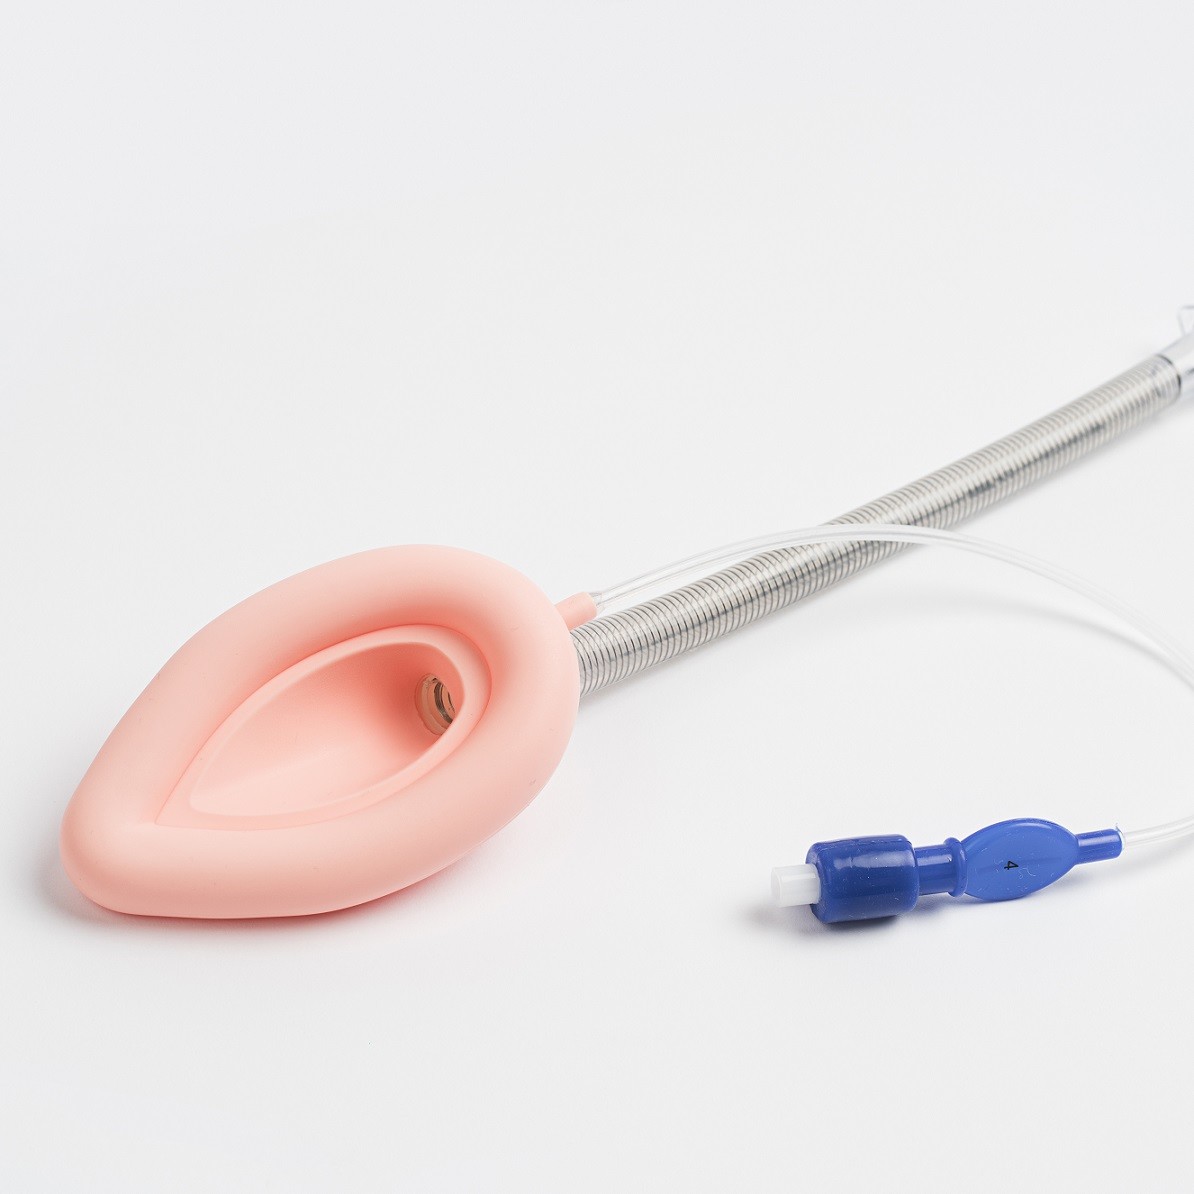  Adult Use Size 5.0 Laryngeal Mask Airway Laryngeal Tube Airway Silicone Made Manufactures